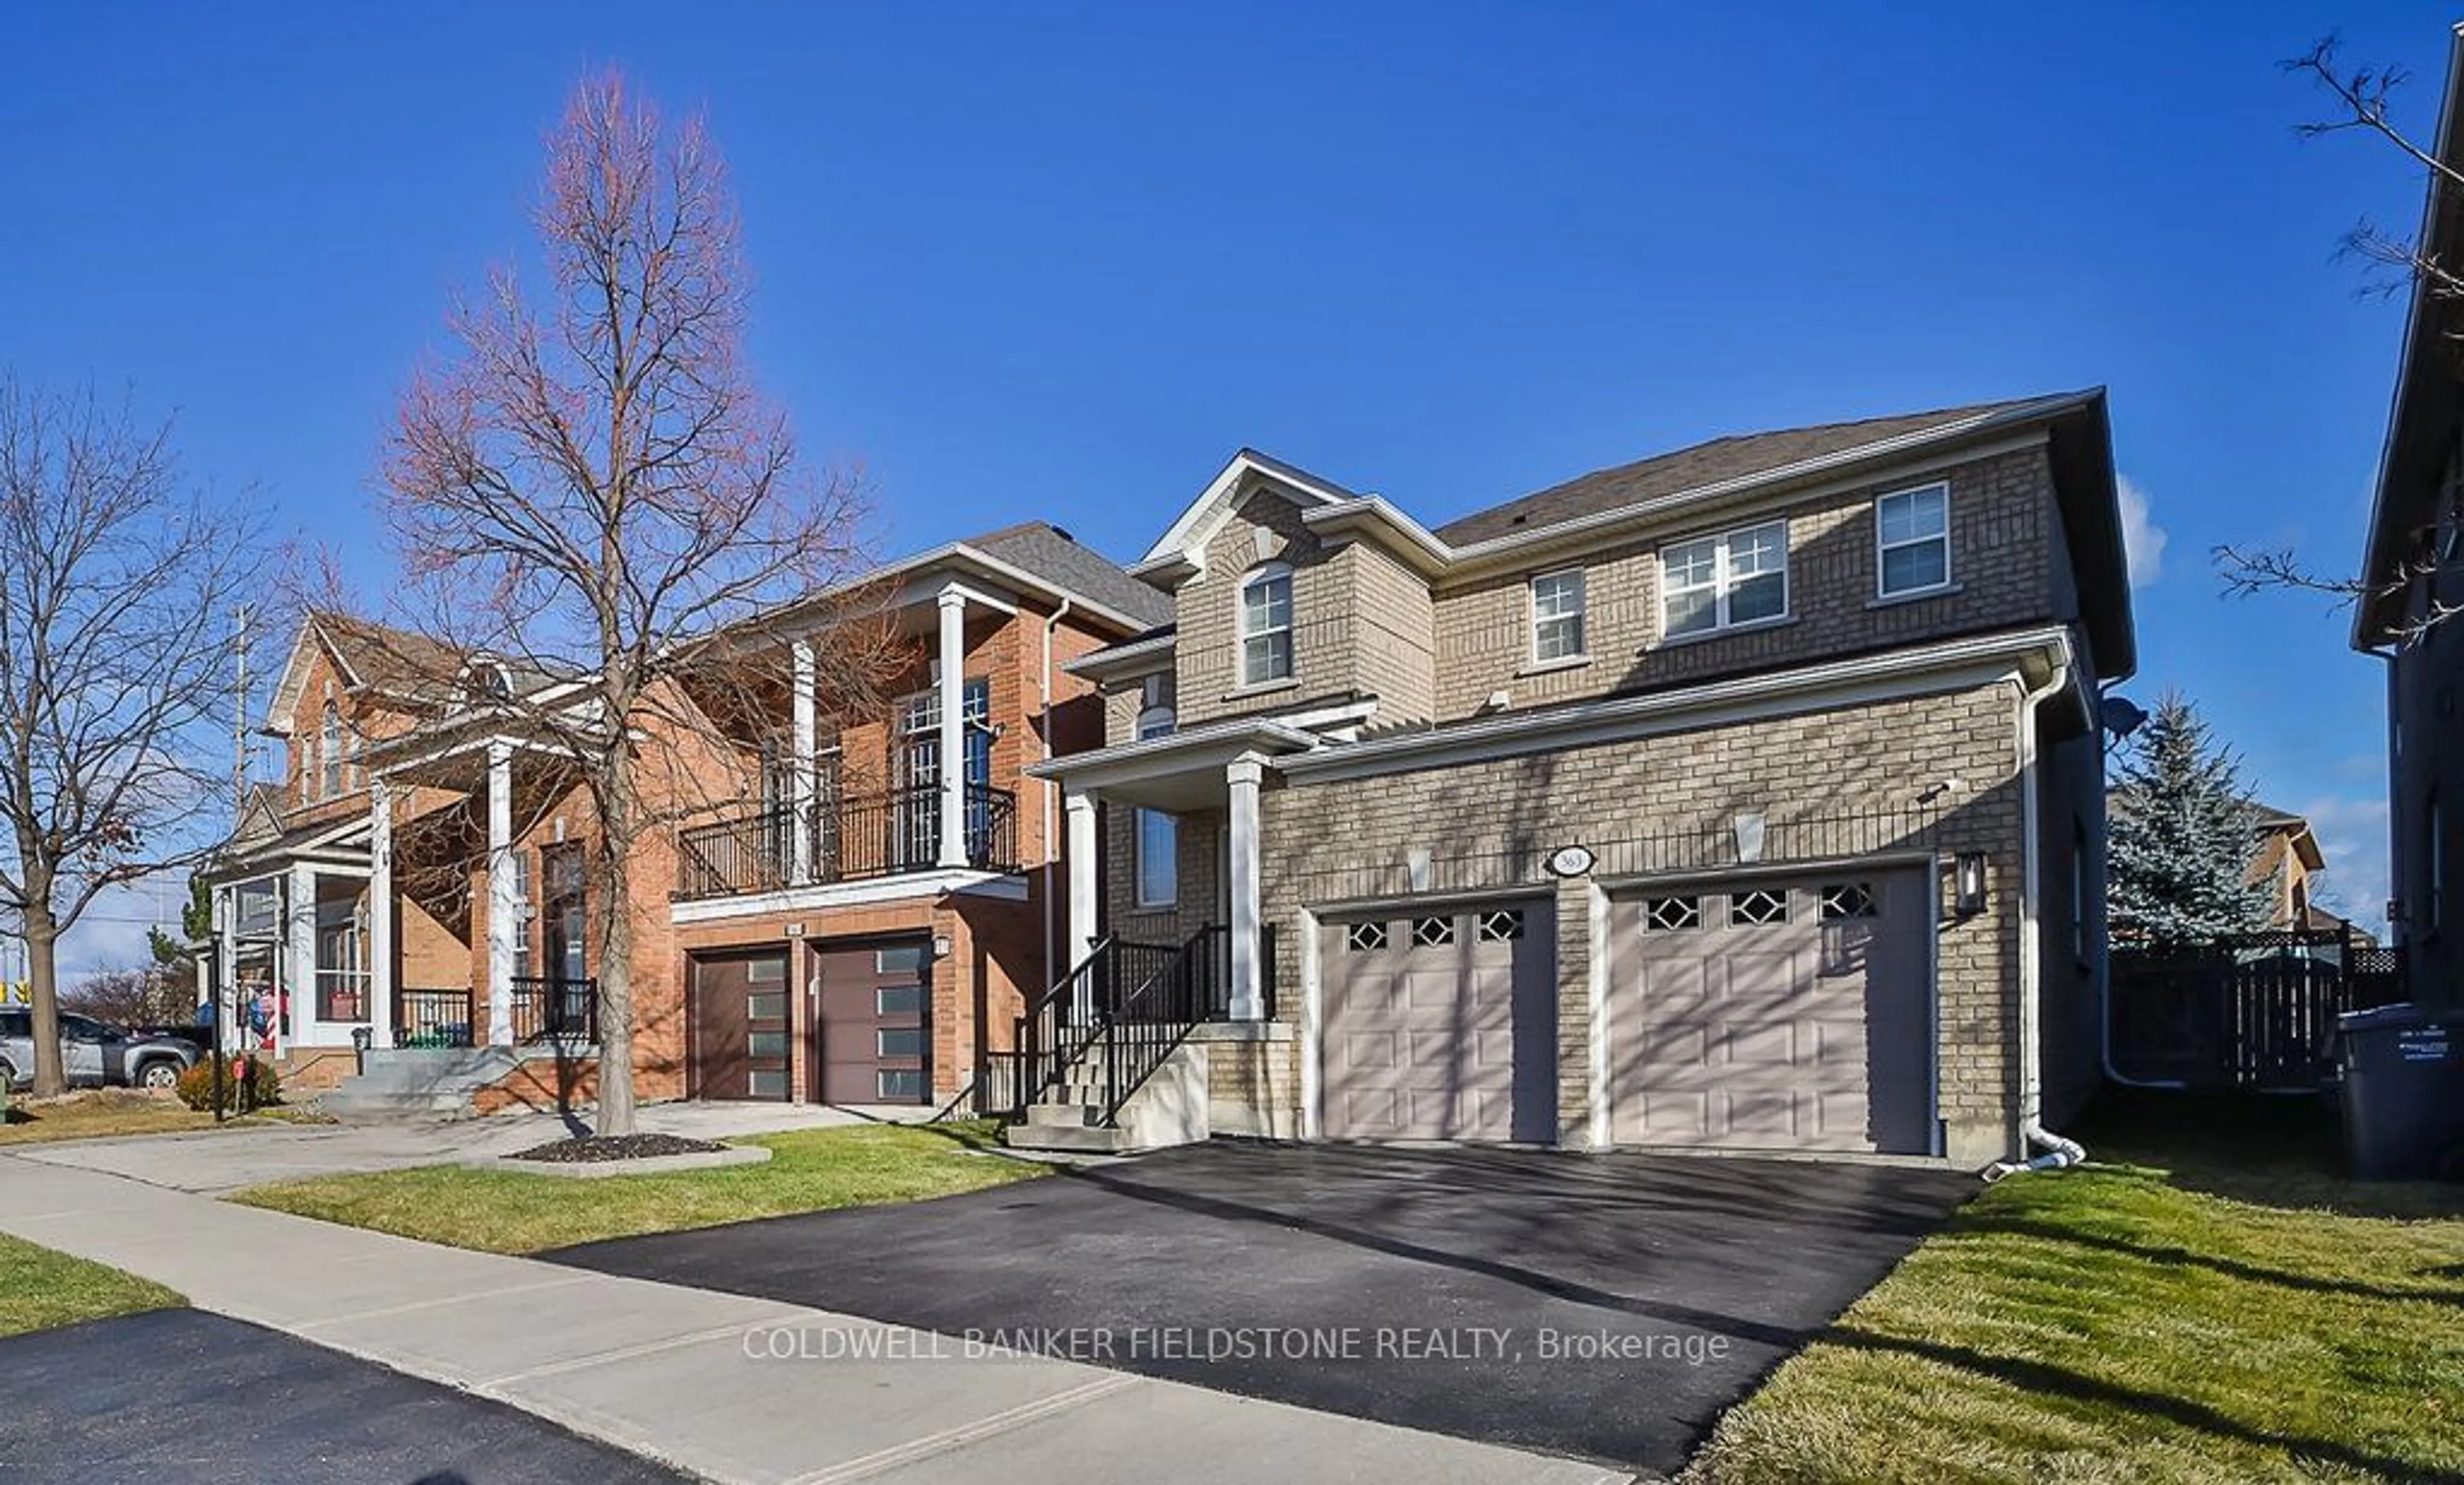 Home with brick exterior material for 363 Edenbrook Hill Dr, Brampton Ontario L7A 2N4